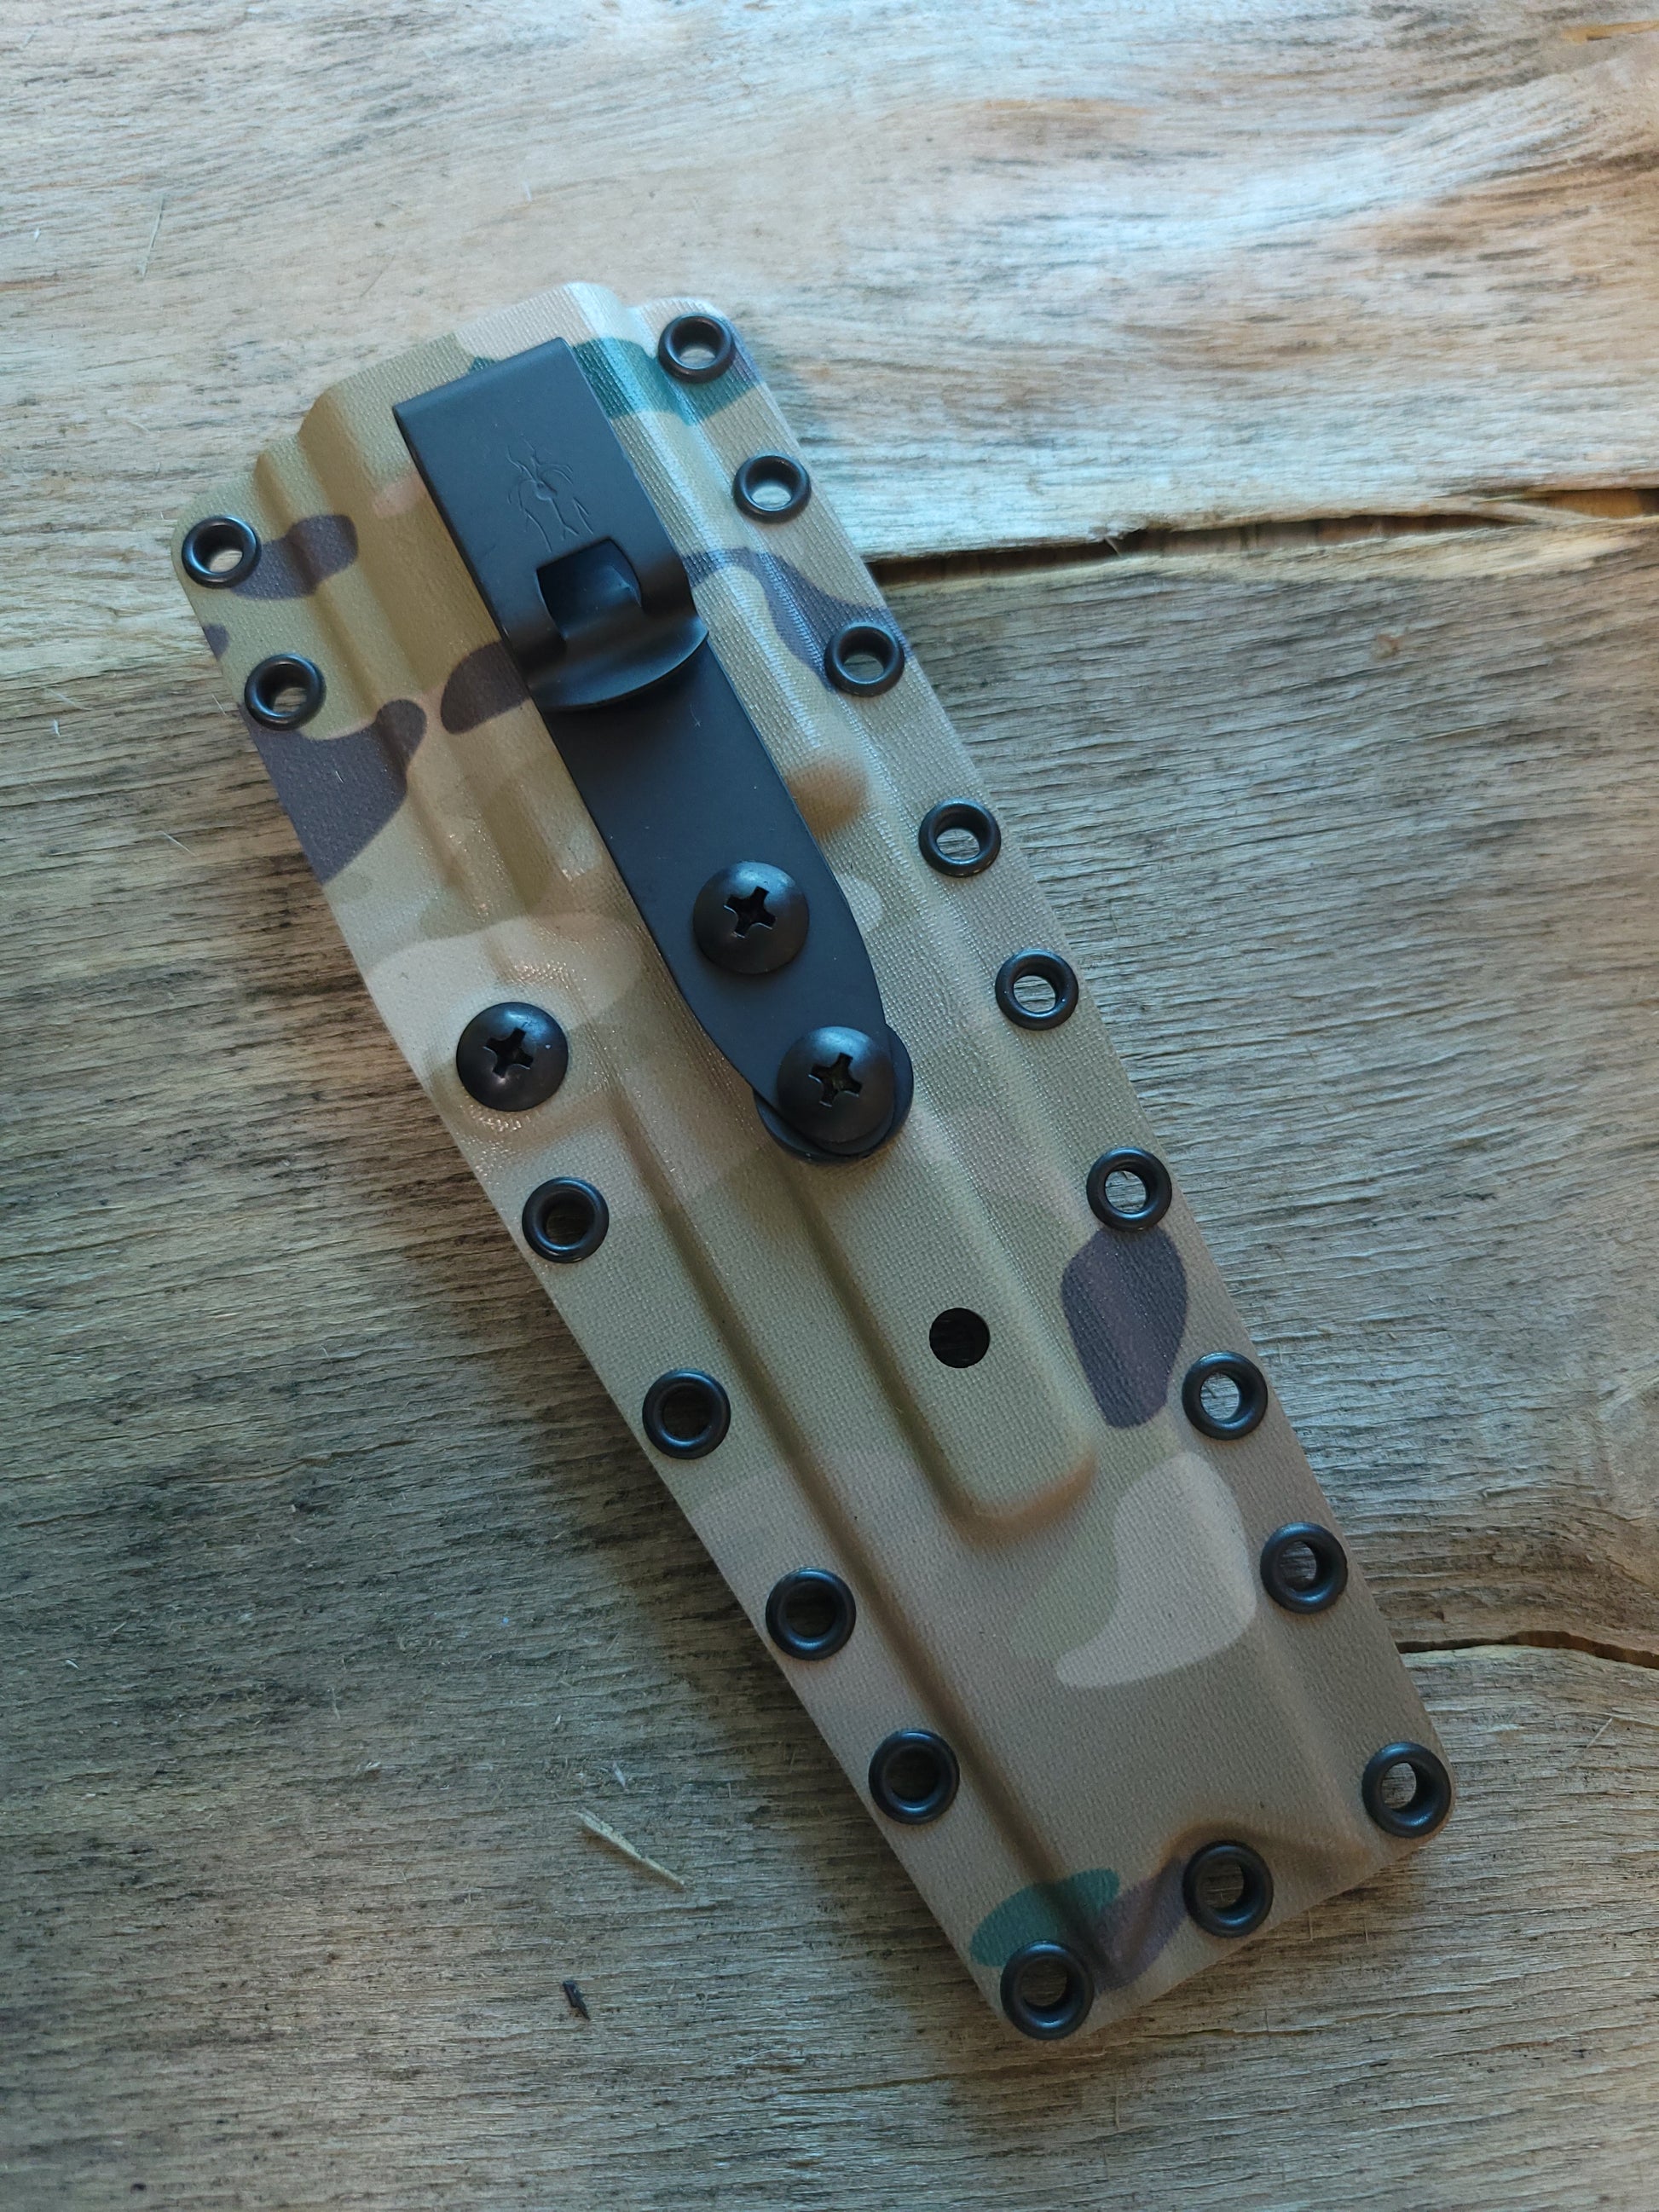 Scout Style Benchmade Bushcrafter Kydex Sheath - Grommet's